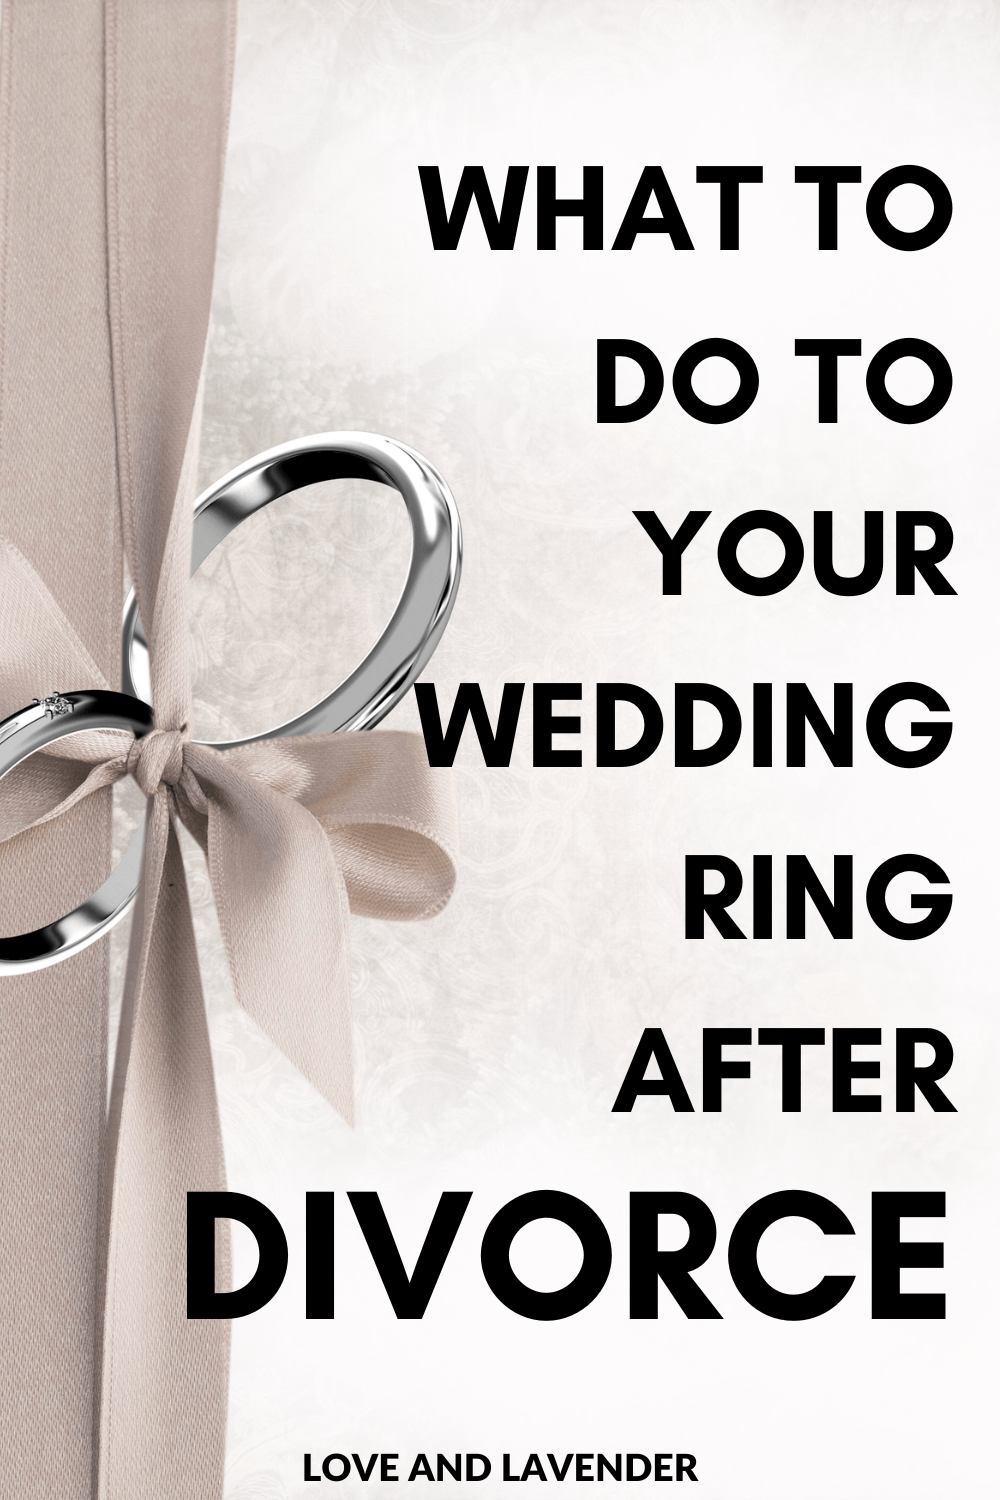 How to Sell Your Wedding Rings After a Divorce